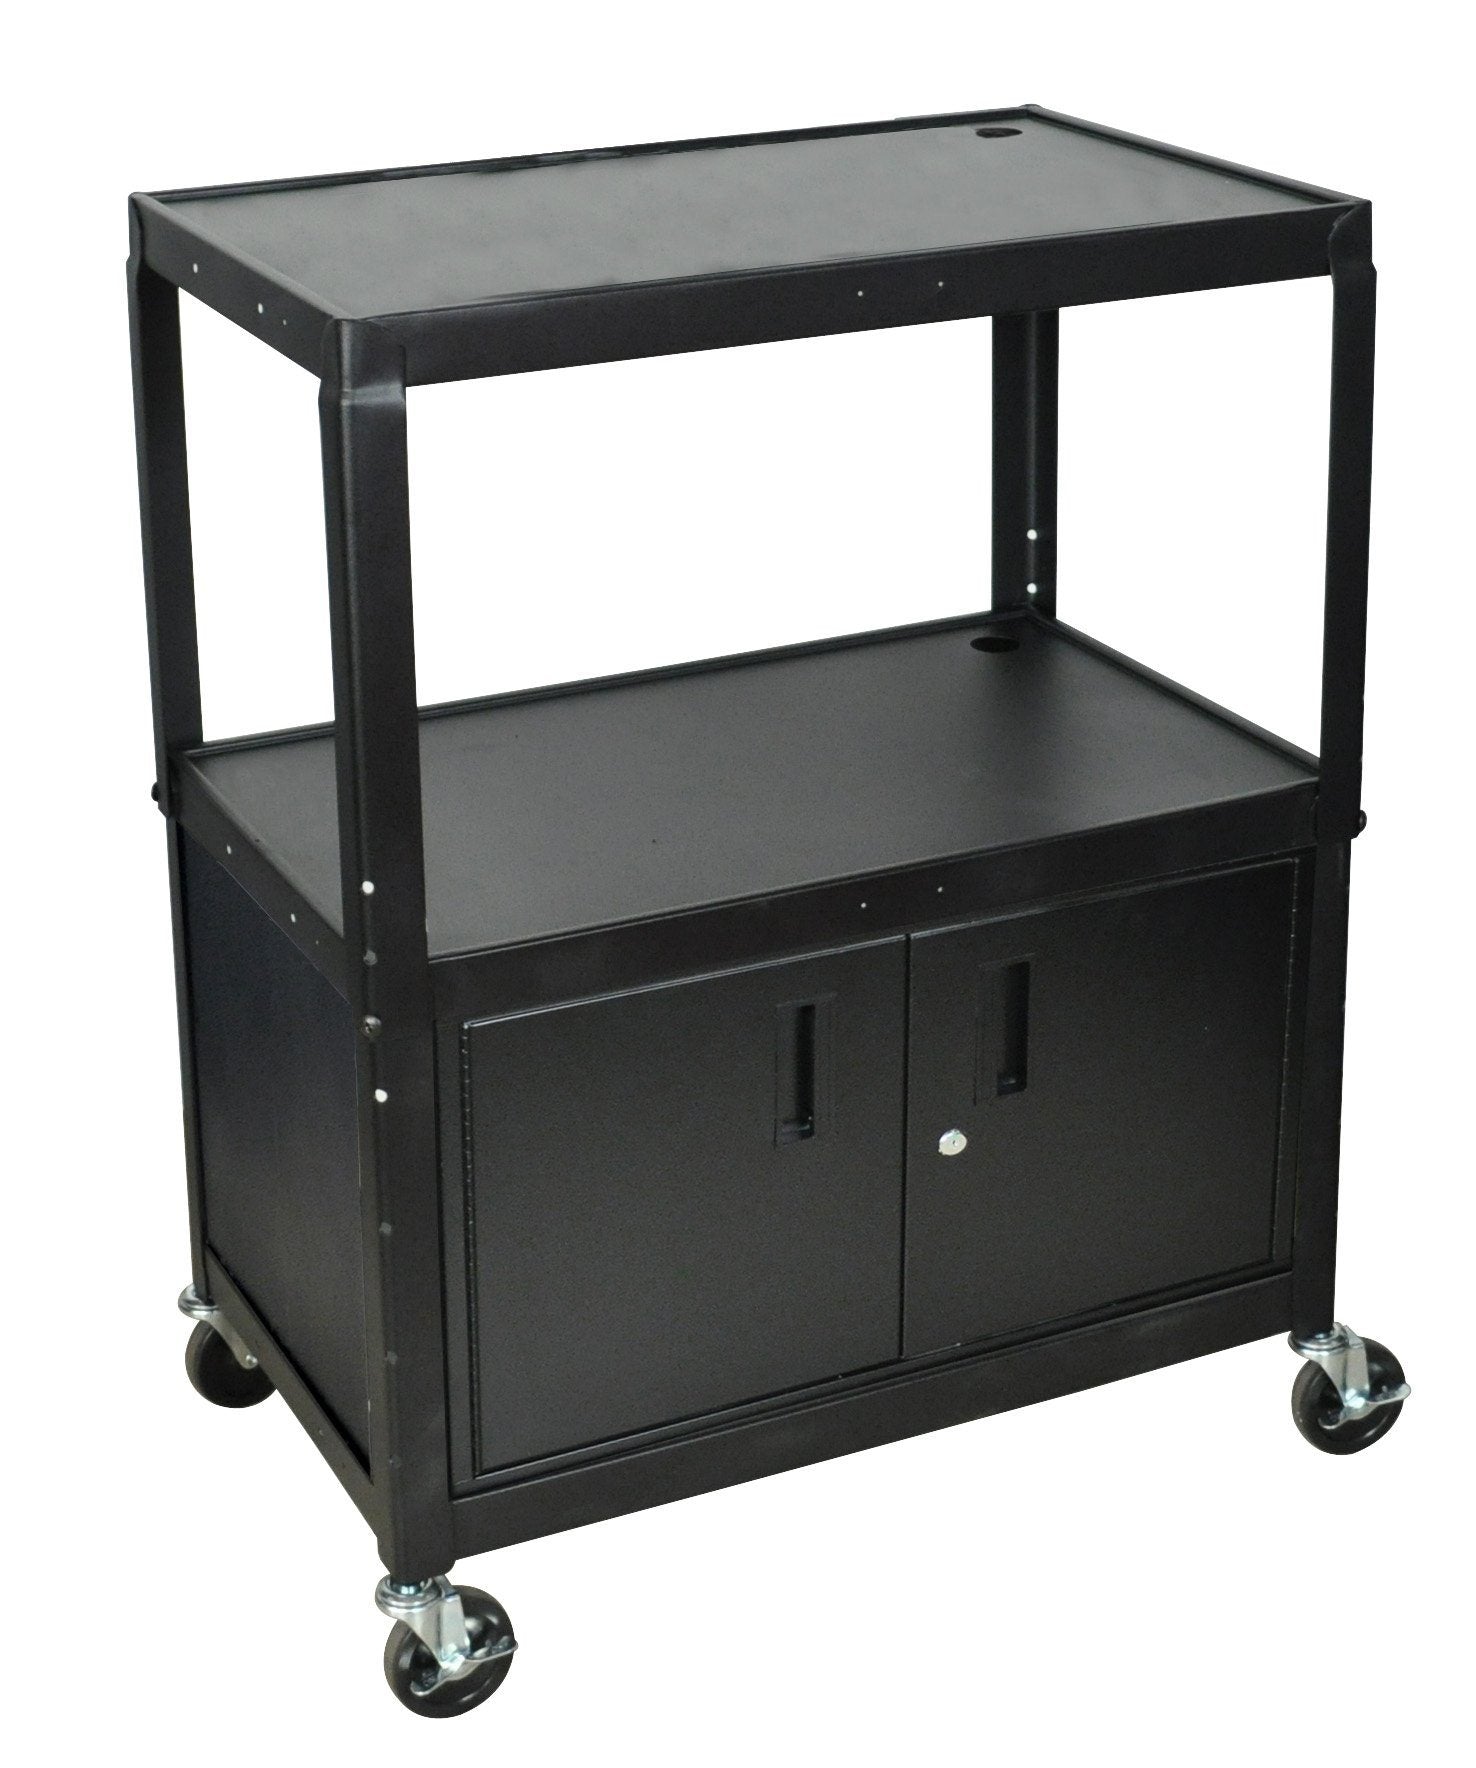 Luxor Extra Wide Steel Adjustable Height A/V Cart W/ Cabinet